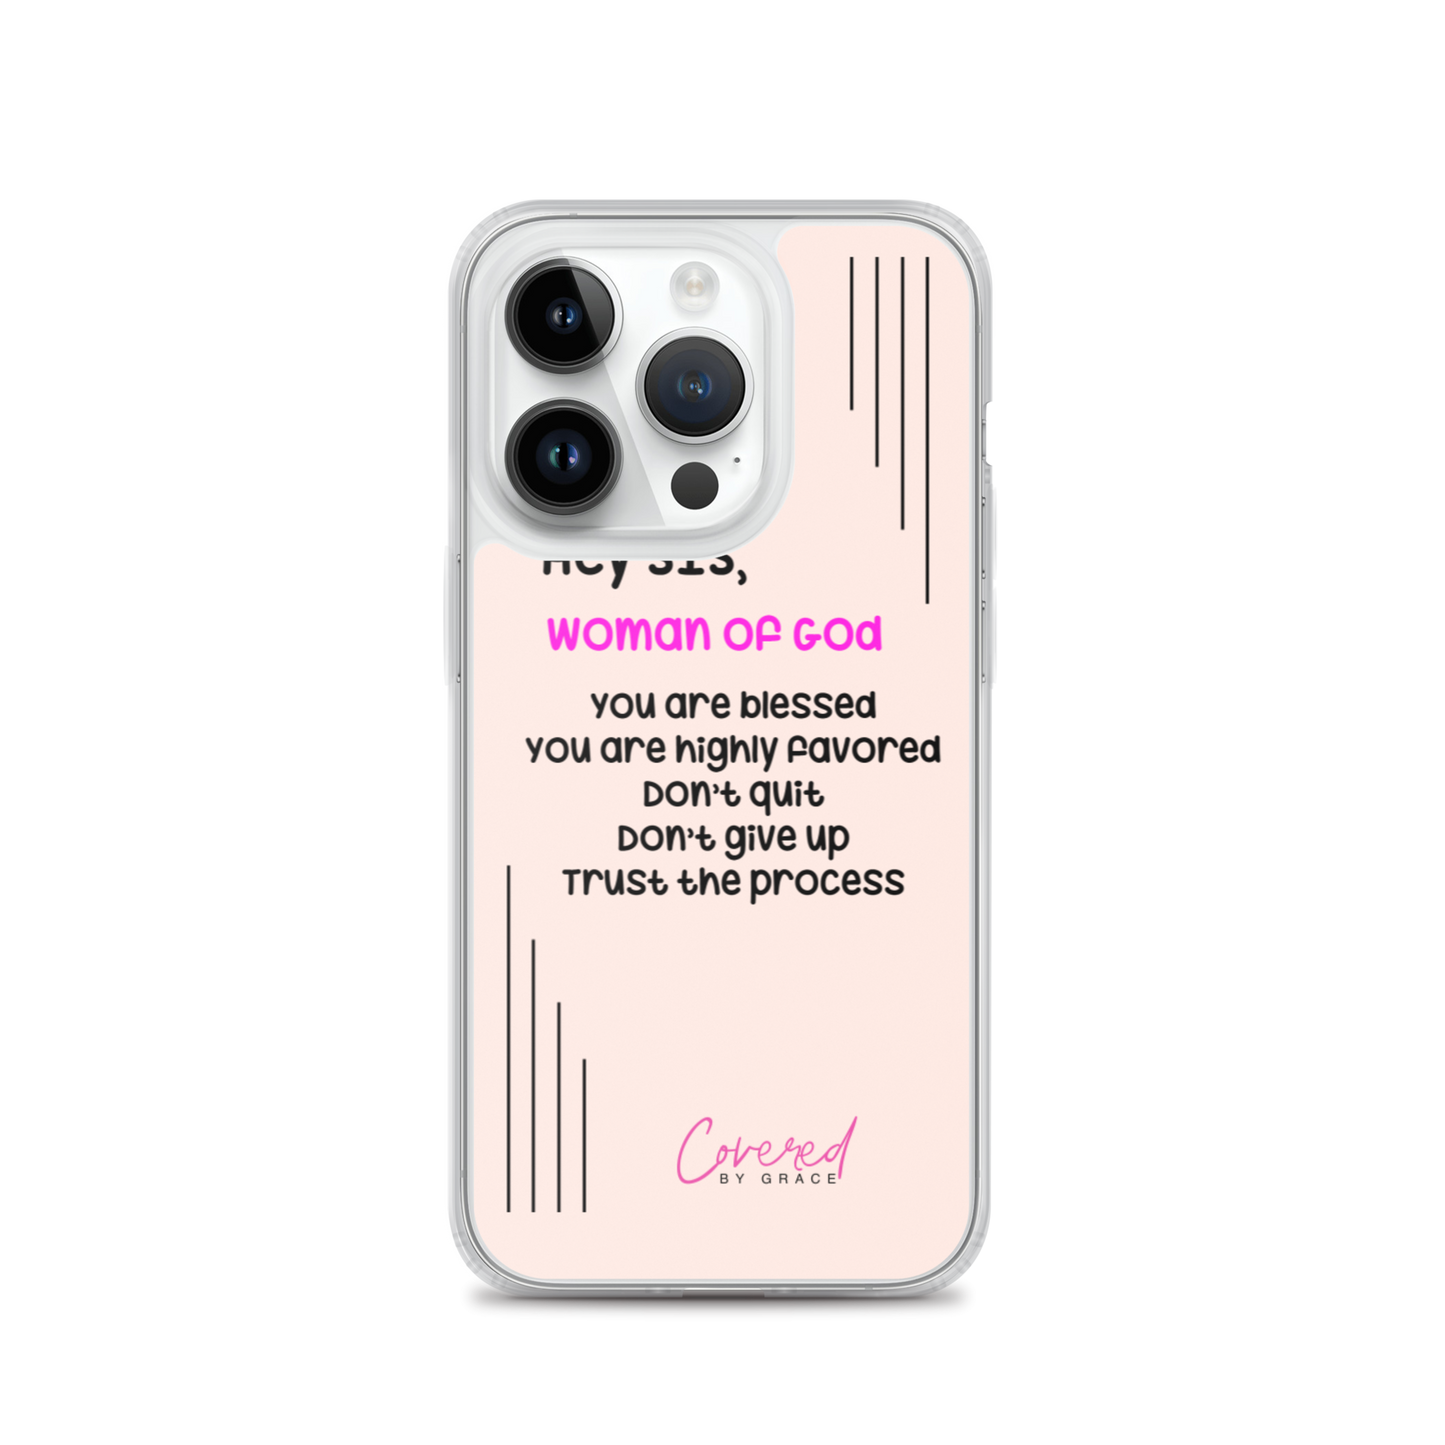 Hey Sis | Woman of God iPhone Case